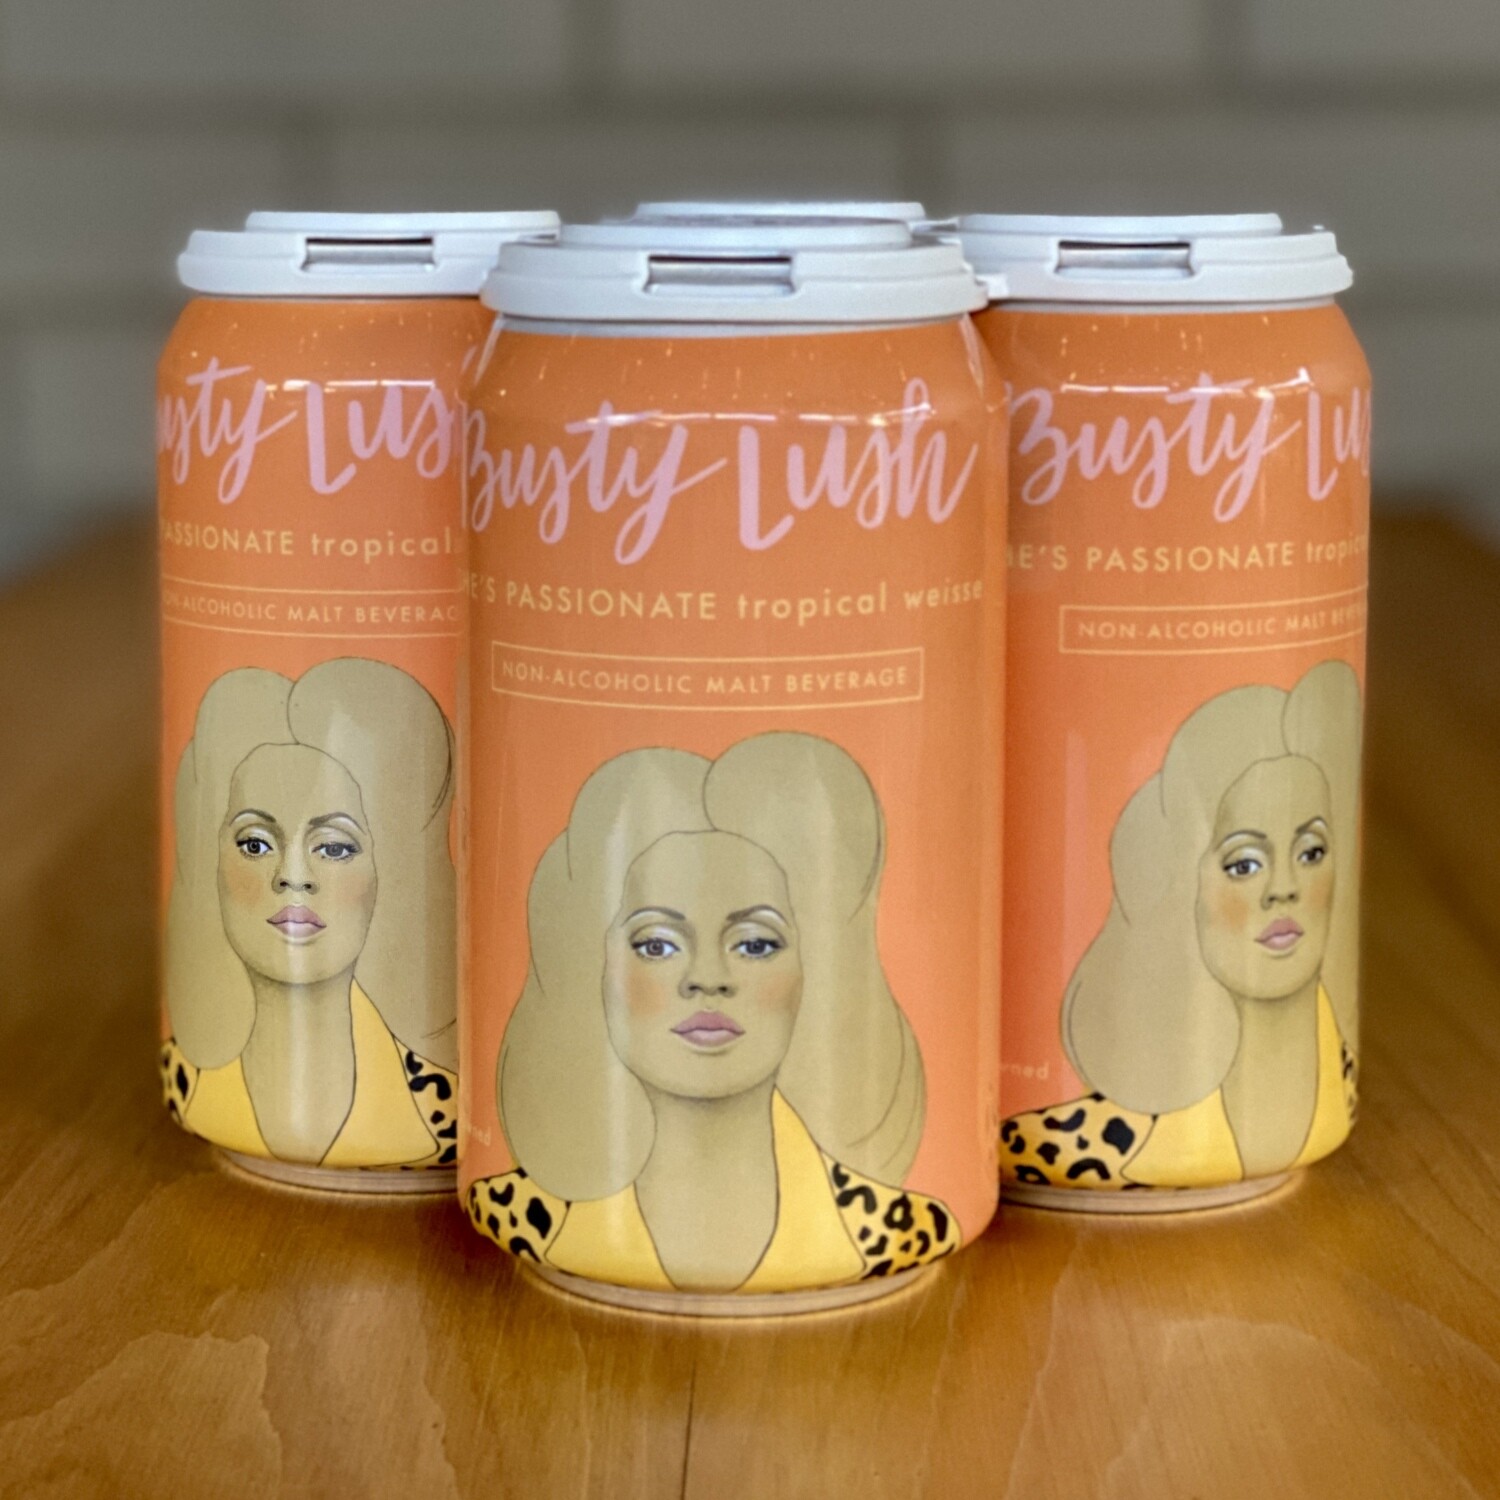 Busty Lush She's Passionate Non-Alcoholic Berliner Weisse (4pk)